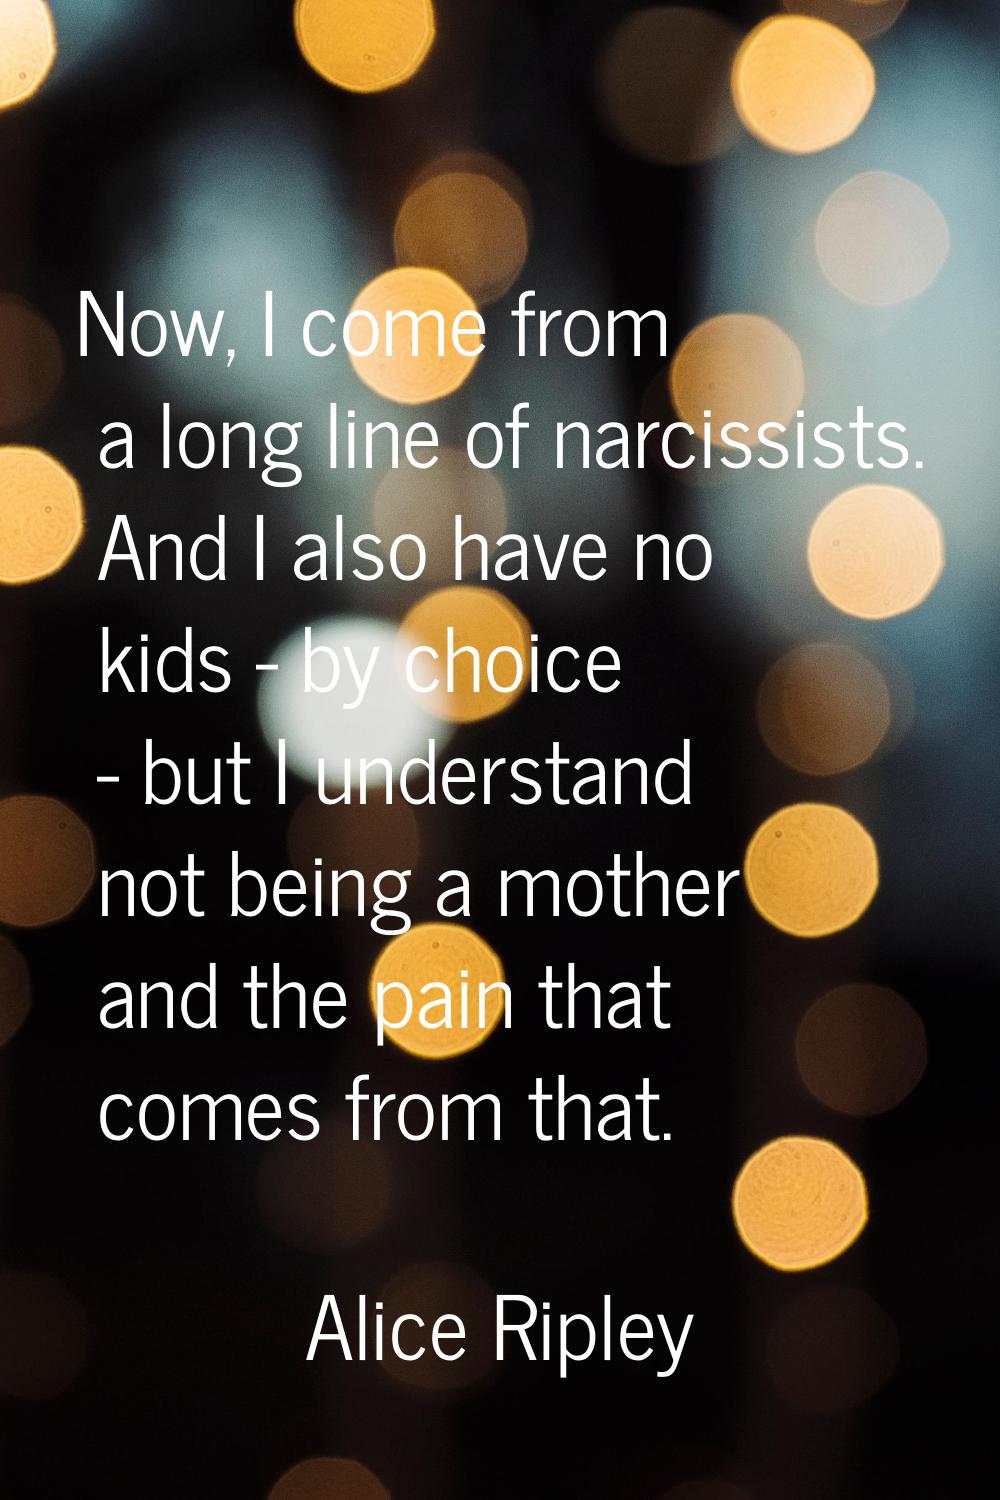 Now, I come from a long line of narcissists. And I also have no kids - by choice - but I understand